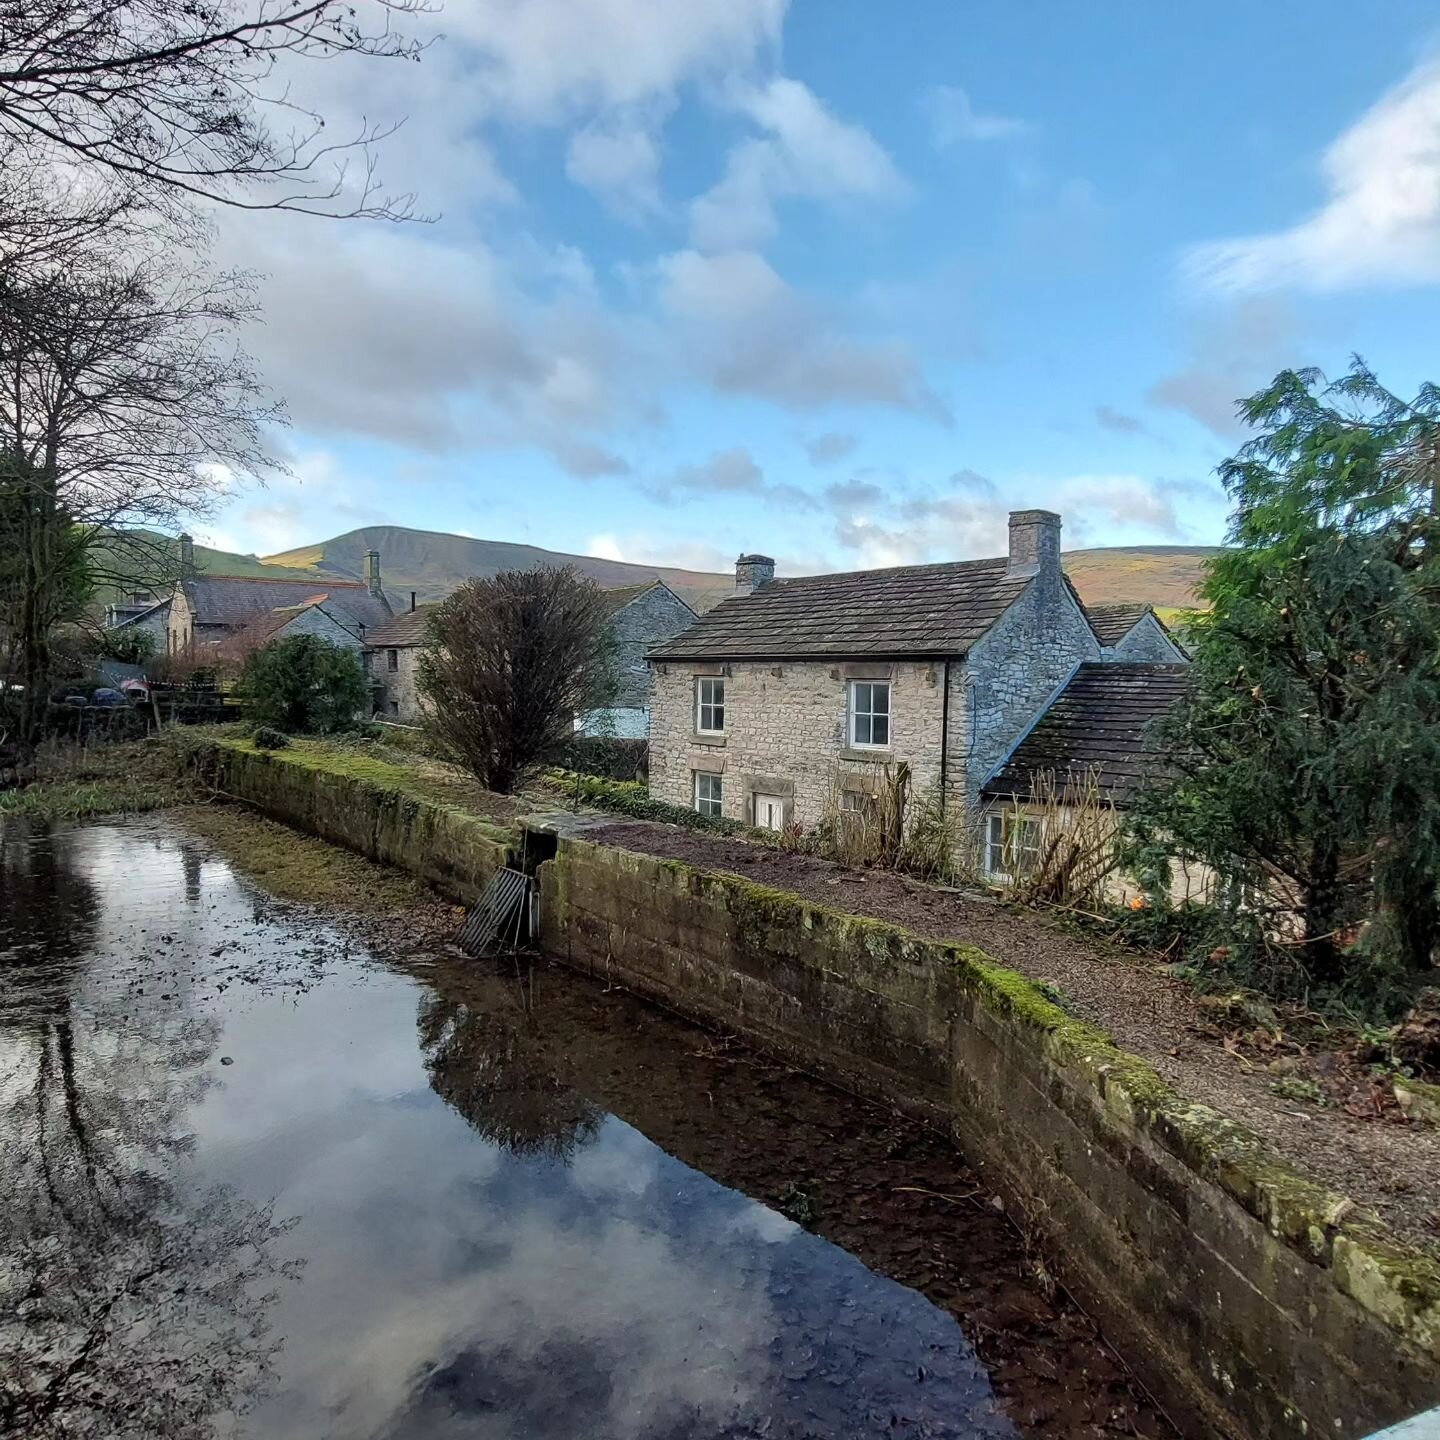 Another beautiful peaks view restored in Castleton. The MD of Cambion now has a view of mam tor. Swipe for before. #treesurgery #treework #arboricultural #arborist #hopevalley #mamtor #castleton #peaks #peakdistrict